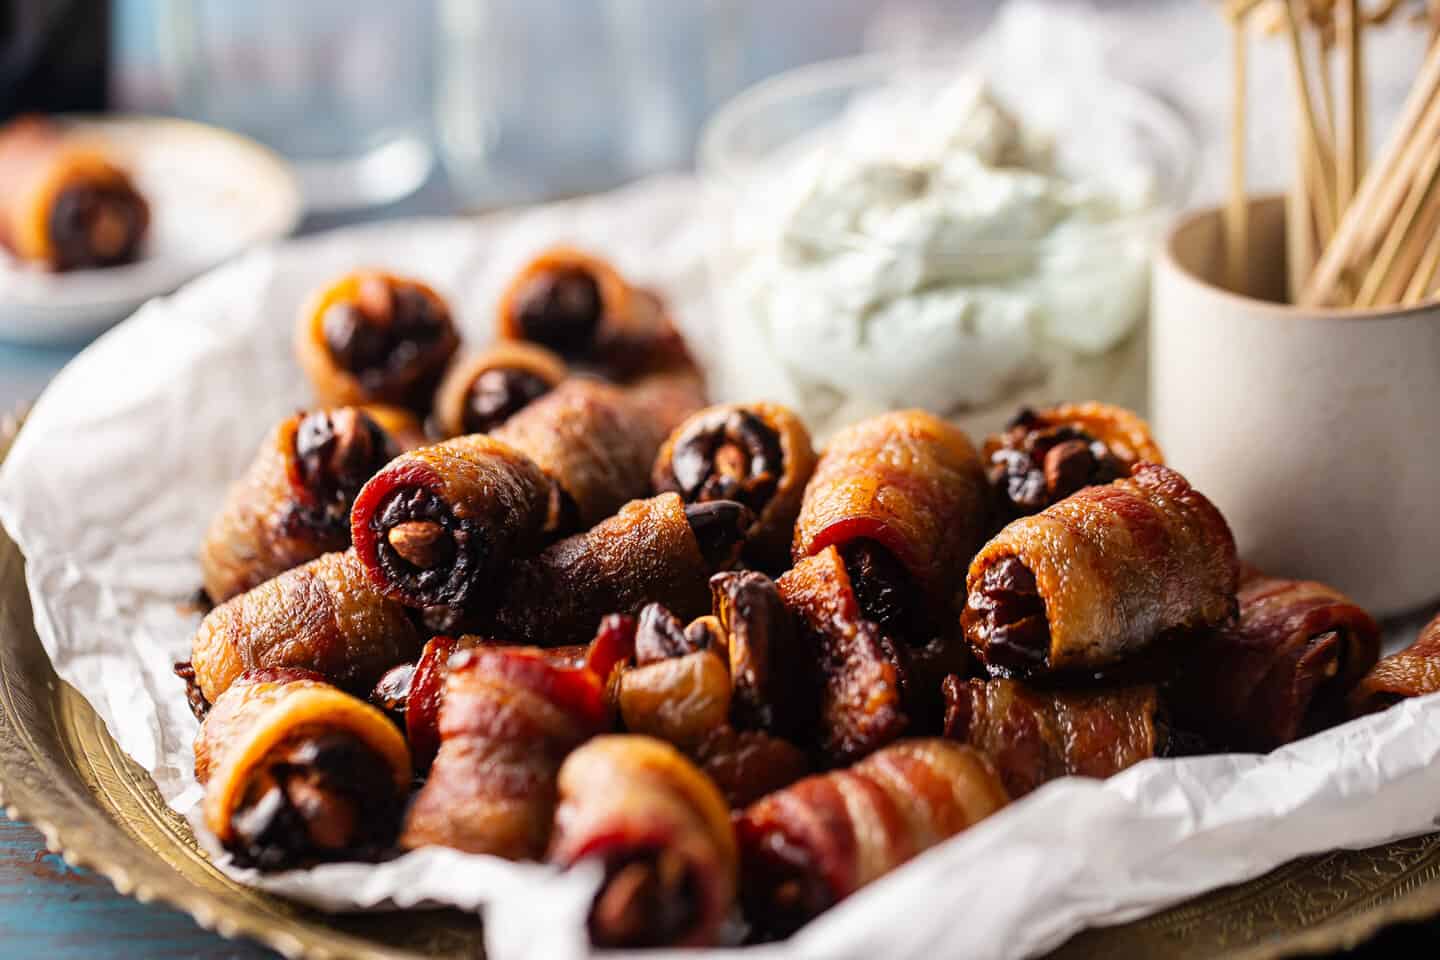 A tray piled high with bacon wrapped stuff dates, served alongside a whipped blue cheese dip.